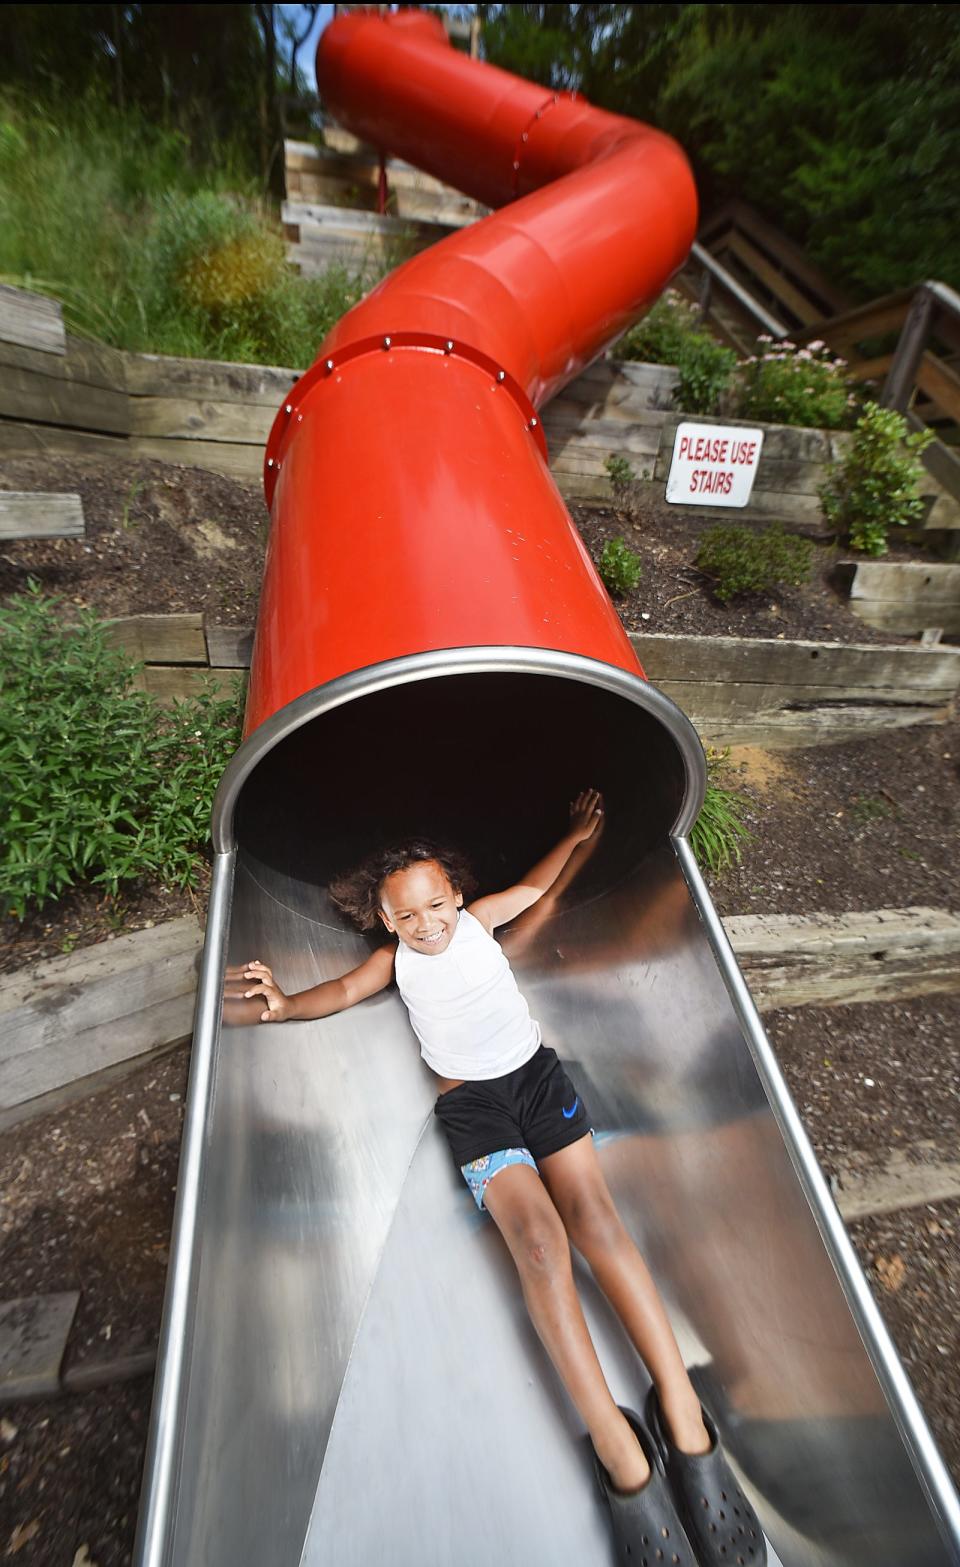 Kordyll Aosa of Fall River on the big red slide at Pierce Beach in Somerset.